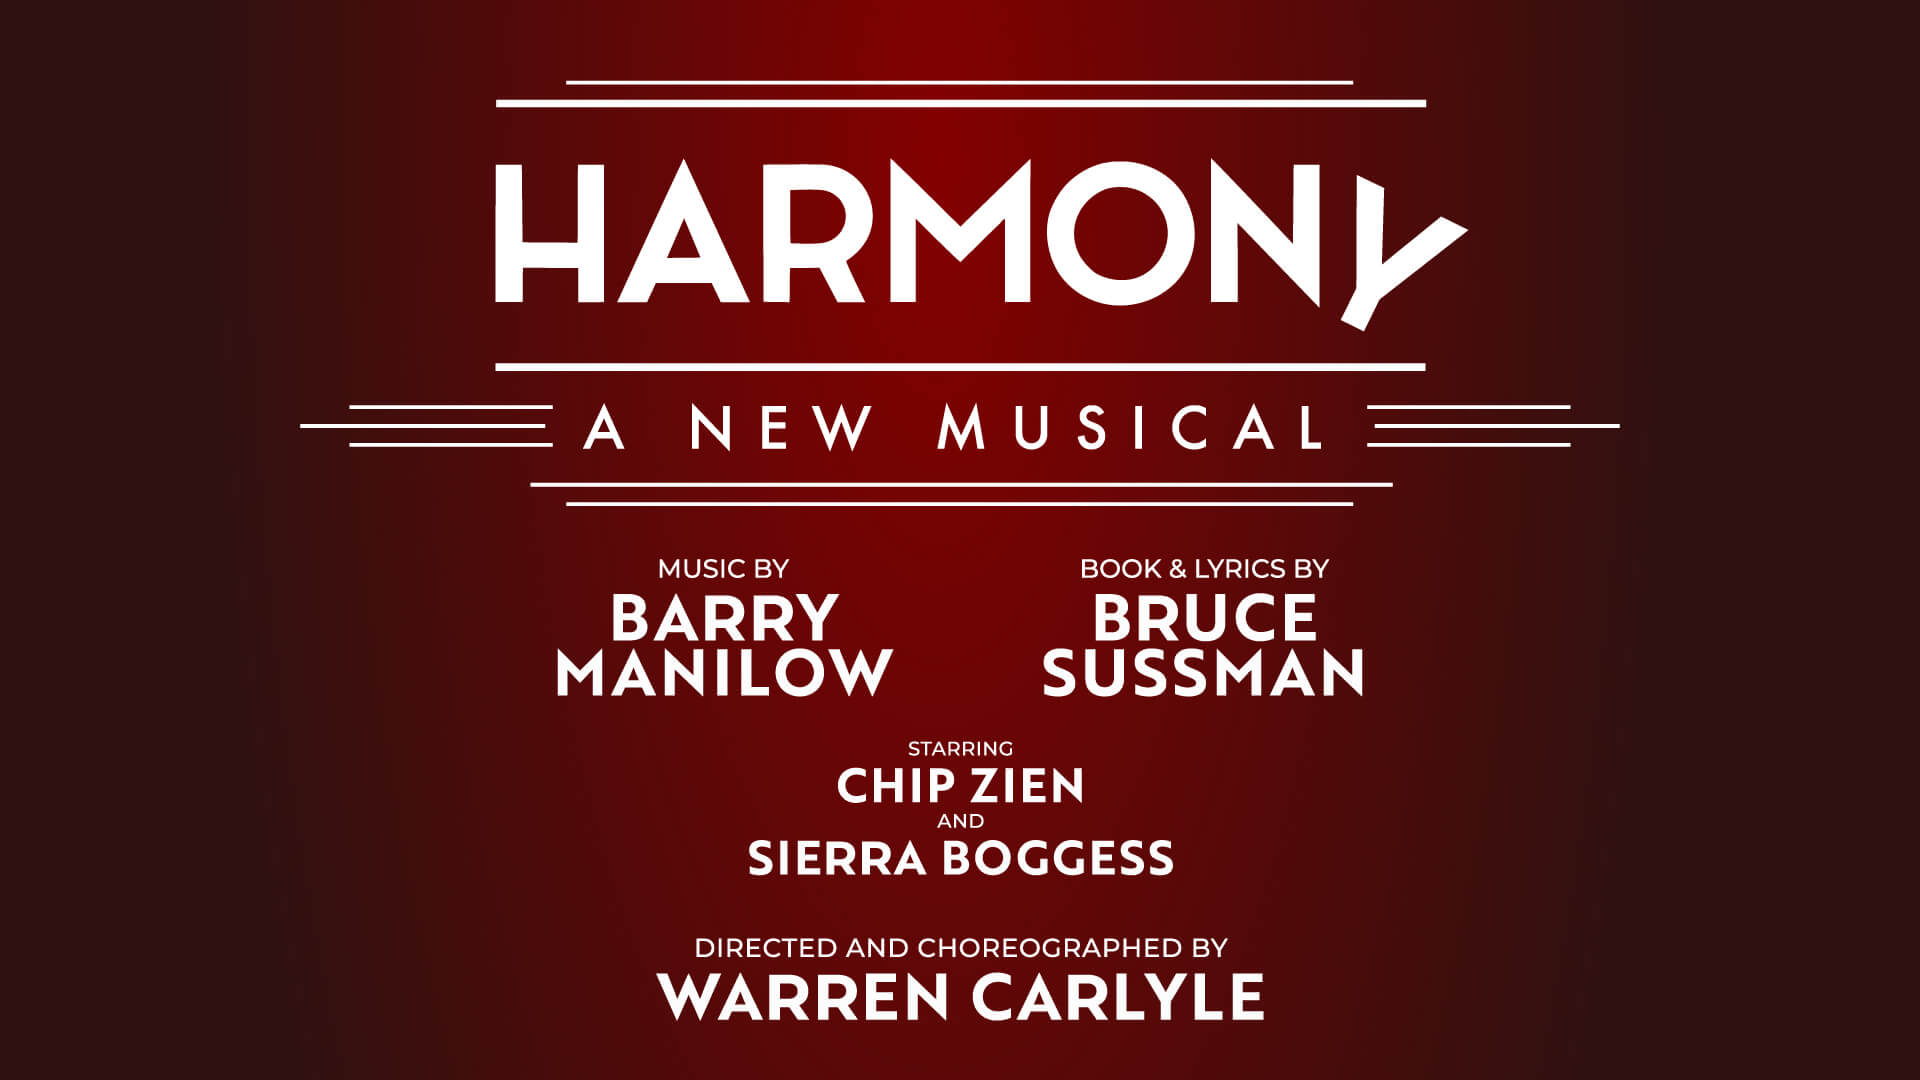 Harmony: A New Musical • TKTS Now On Sale! • Barry Manilow